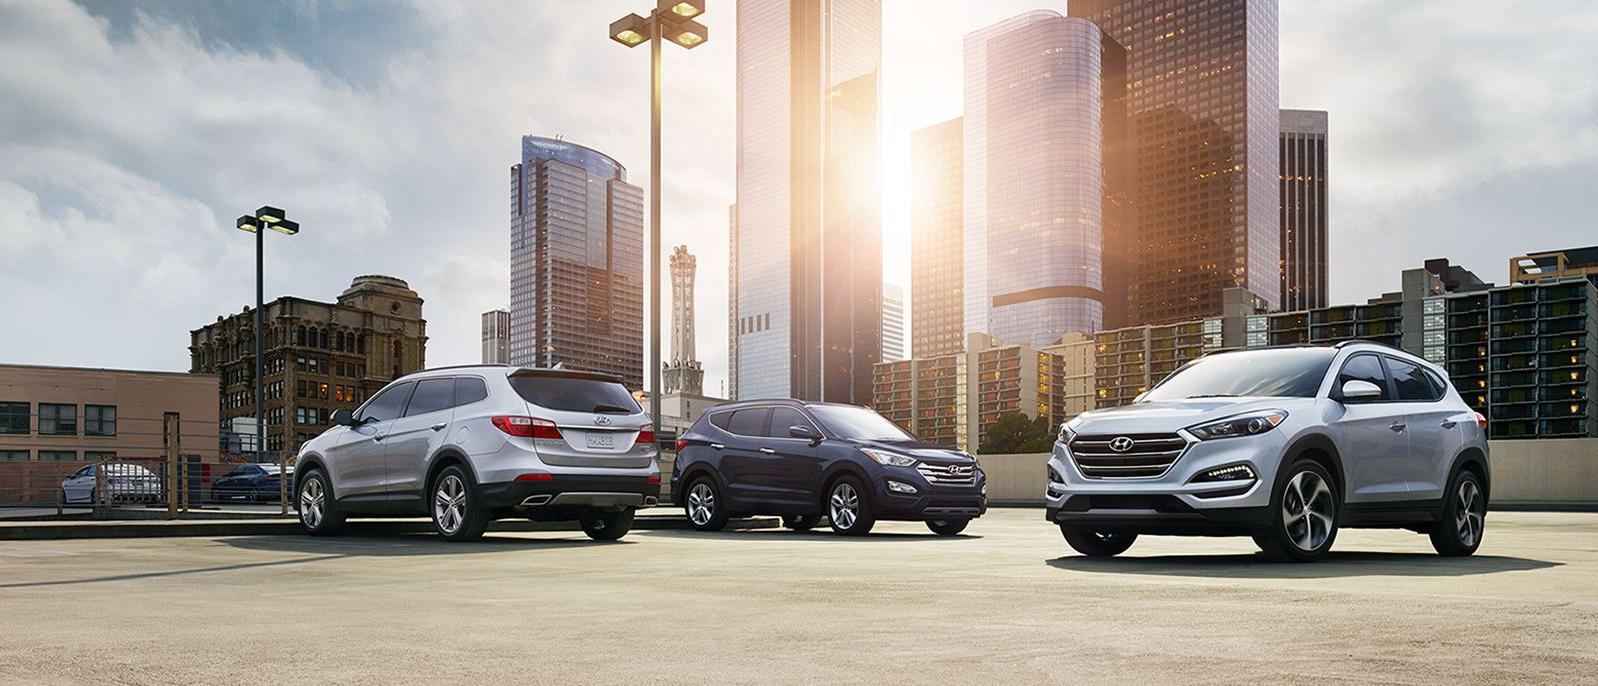 Hyundai 2016 model lineup parked in a downtown parking lot.